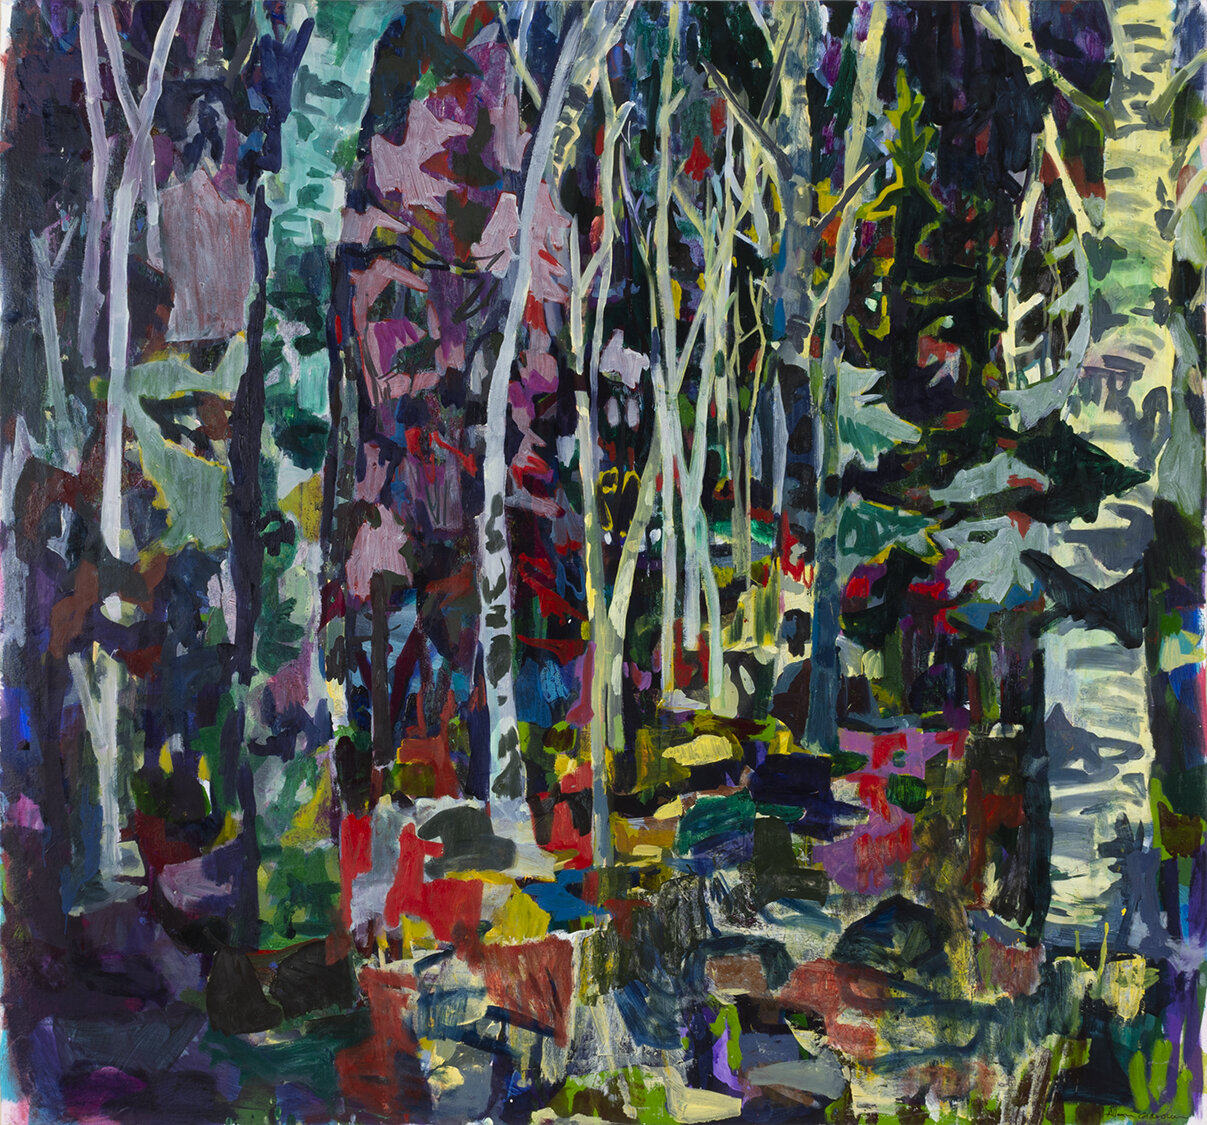   In the Forest , 2020, acrylic and oil on canvas, 56 in. x 60 in. 